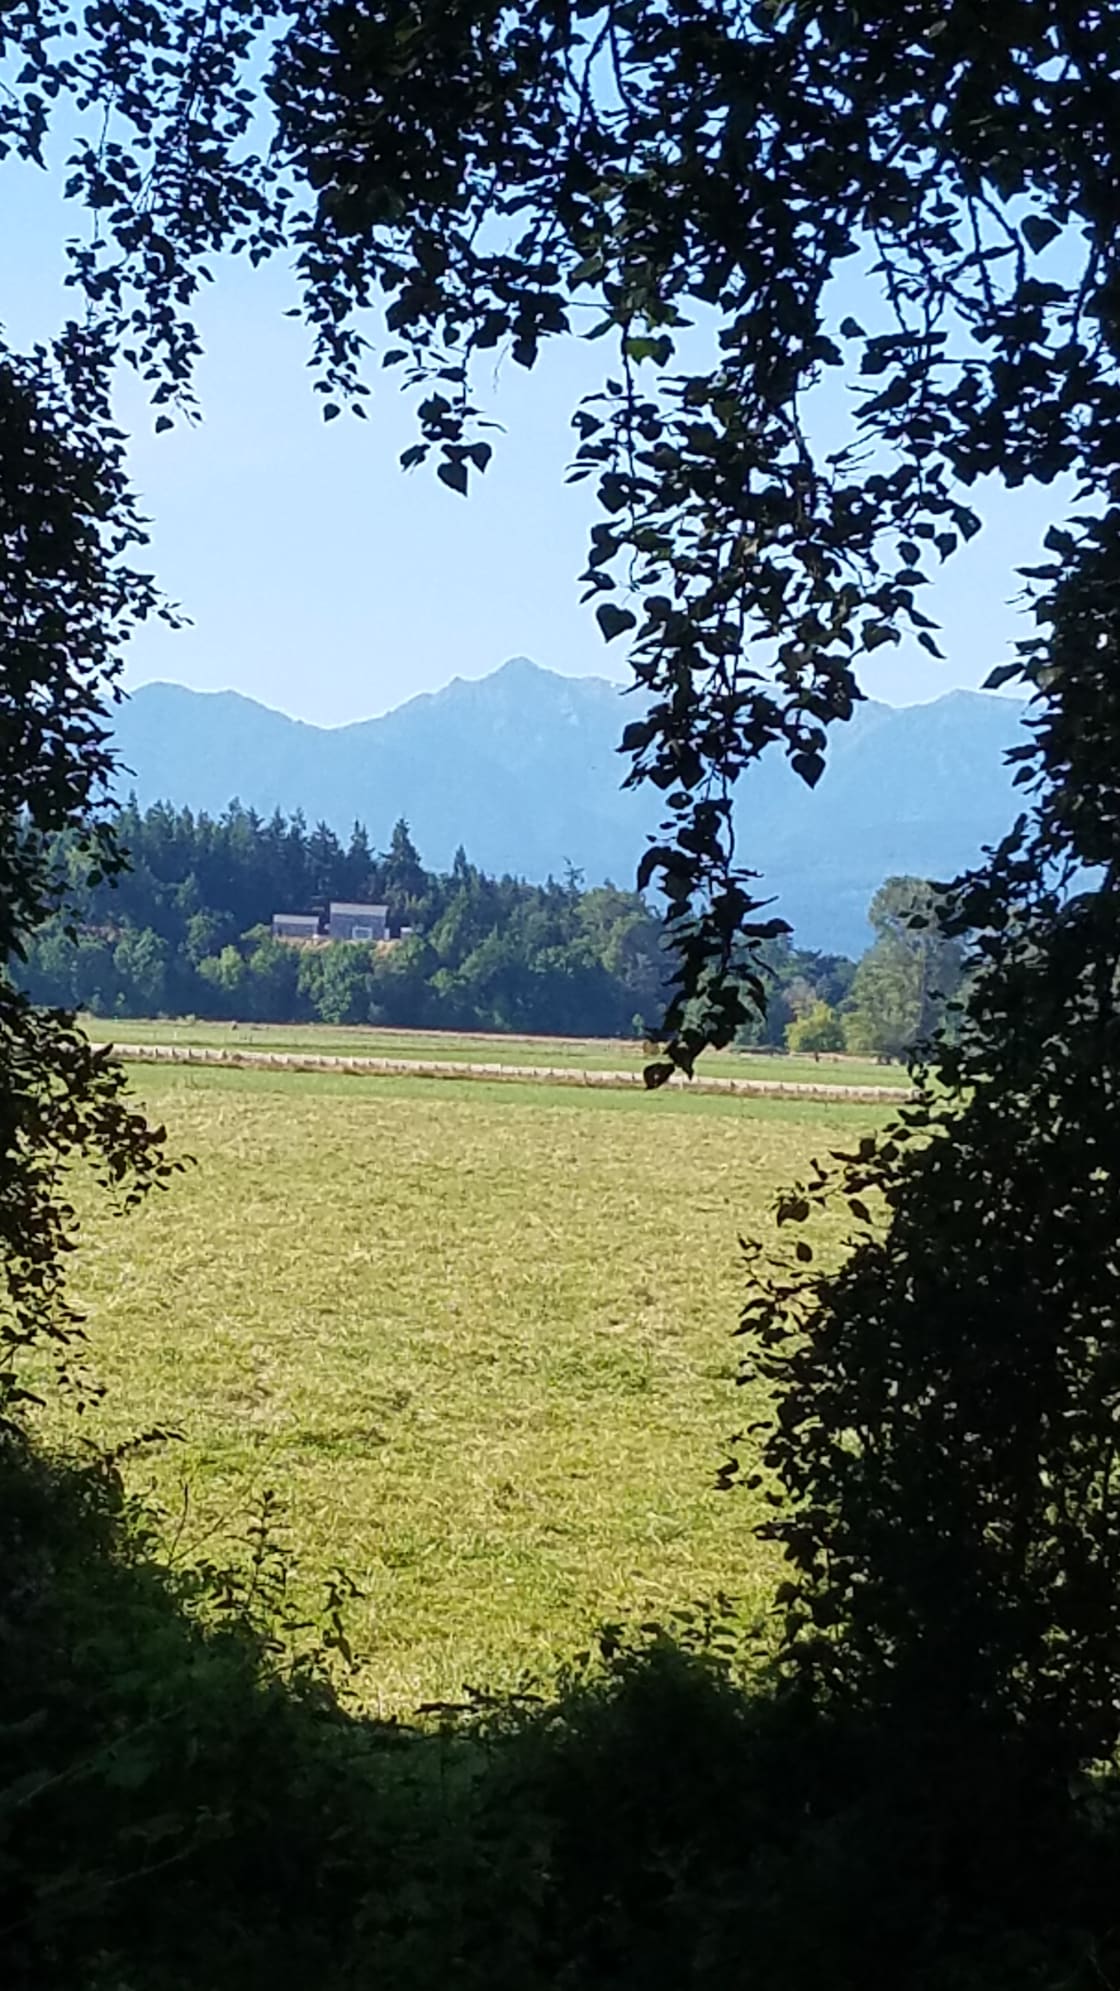 Olympic Mountains across hay fields